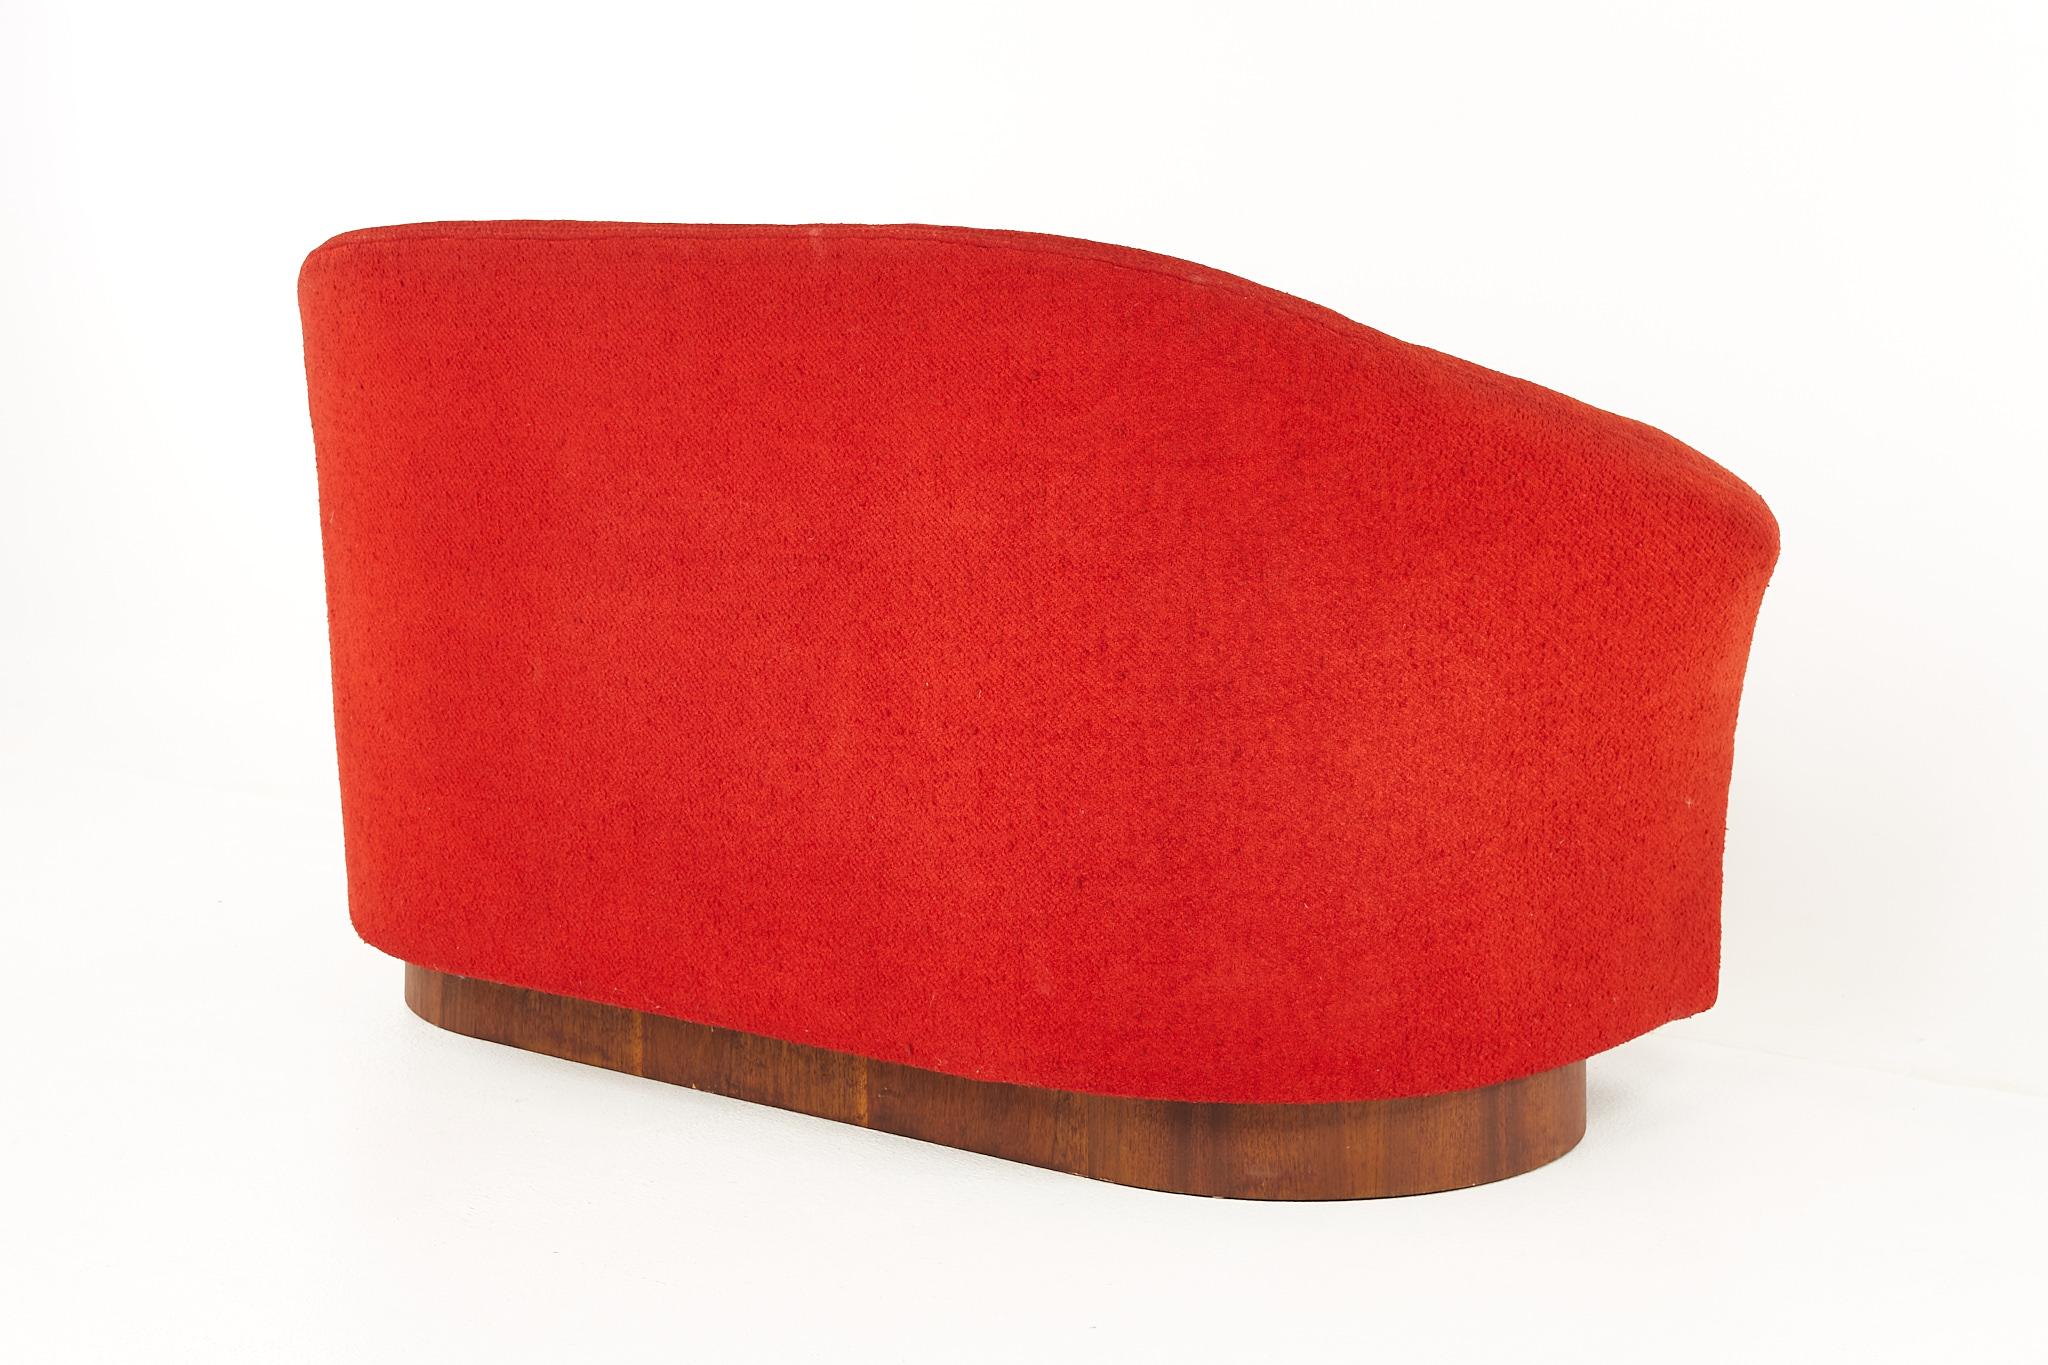 Upholstery Adrian Pearsall for Craft Associates MCM Walnut Plinth Base Red Loveseat